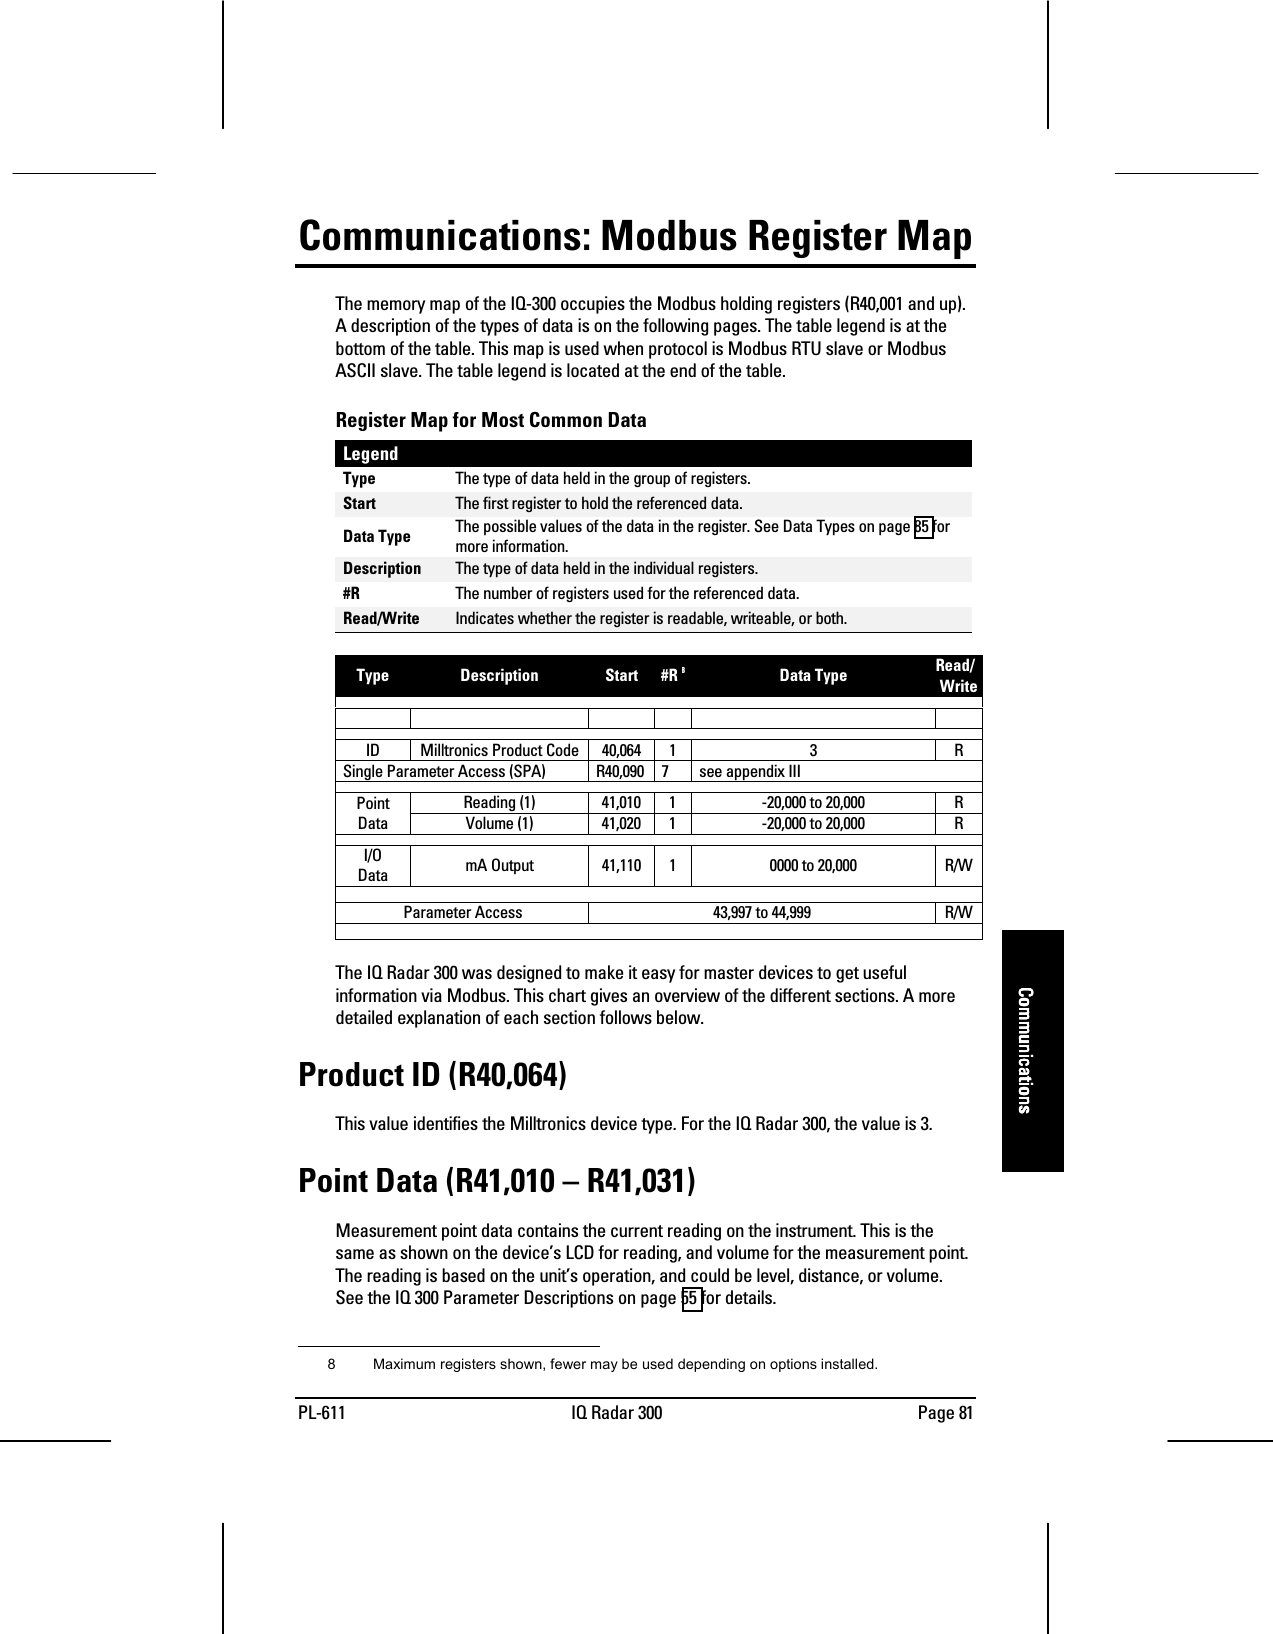 PL-611 IQ Radar 300 Page 81CommunicationsCommunicationsCommunicationsCommunicationsCommunications: Modbus Register MapThe memory map of the IQ-300 occupies the Modbus holding registers (R40,001 and up).A description of the types of data is on the following pages. The table legend is at thebottom of the table. This map is used when protocol is Modbus RTU slave or ModbusASCII slave. The table legend is located at the end of the table.Register Map for Most Common DataLegendType The type of data held in the group of registers.Start The first register to hold the referenced data.Data Type The possible values of the data in the register. See Data Types on page 85 formore information.Description The type of data held in the individual registers.#R The number of registers used for the referenced data.Read/Write Indicates whether the register is readable, writeable, or both.Type Description Start #R 8Data Type Read/WriteID Milltronics Product Code 40,064 1 3 RSingle Parameter Access (SPA) R40,090 7 see appendix IIIReading (1) 41,010 1 -20,000 to 20,000 RPointData Volume (1) 41,020 1 -20,000 to 20,000 RI/OData mA Output 41,110 1 0000 to 20,000 R/WParameter Access 43,997 to 44,999 R/WThe IQ Radar 300 was designed to make it easy for master devices to get usefulinformation via Modbus. This chart gives an overview of the different sections. A moredetailed explanation of each section follows below.Product ID (R40,064)This value identifies the Milltronics device type. For the IQ Radar 300, the value is 3.Point Data (R41,010 – R41,031)Measurement point data contains the current reading on the instrument. This is thesame as shown on the device’s LCD for reading, and volume for the measurement point.The reading is based on the unit’s operation, and could be level, distance, or volume.See the IQ 300 Parameter Descriptions on page 55 for details.                                                                         8  Maximum registers shown, fewer may be used depending on options installed.